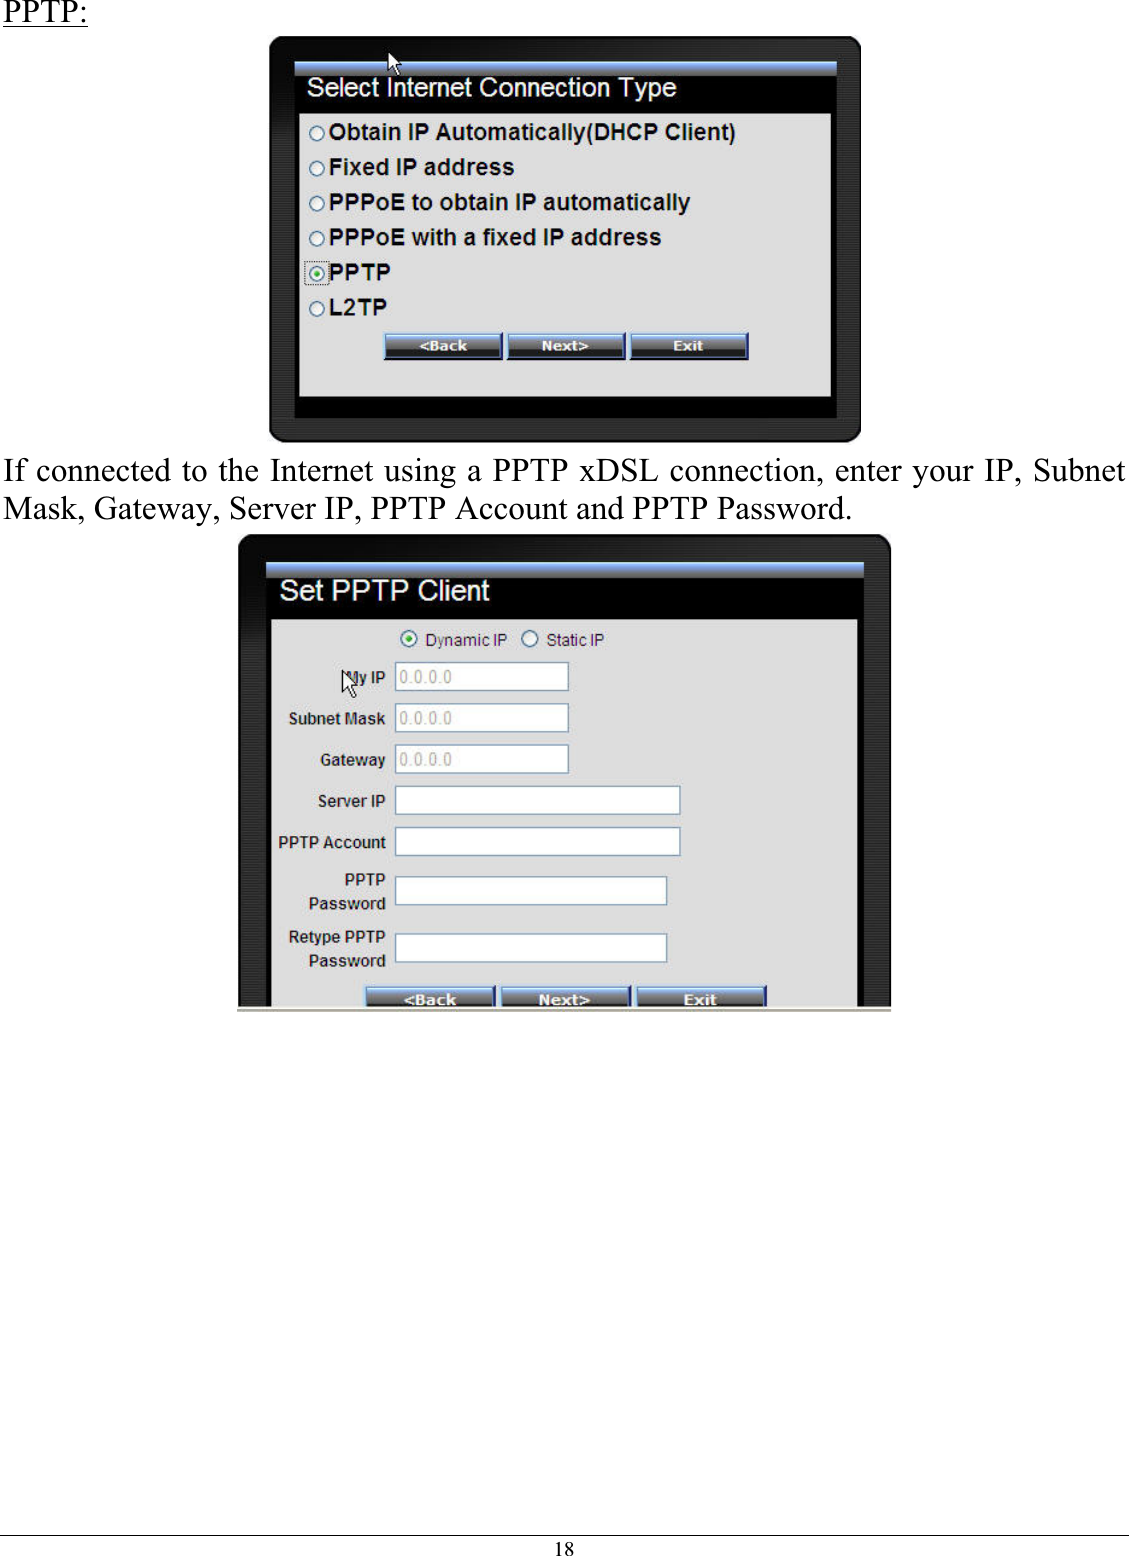 18PPTP:If connected to the Internet using a PPTP xDSL connection, enter your IP, Subnet Mask, Gateway, Server IP, PPTP Account and PPTP Password.